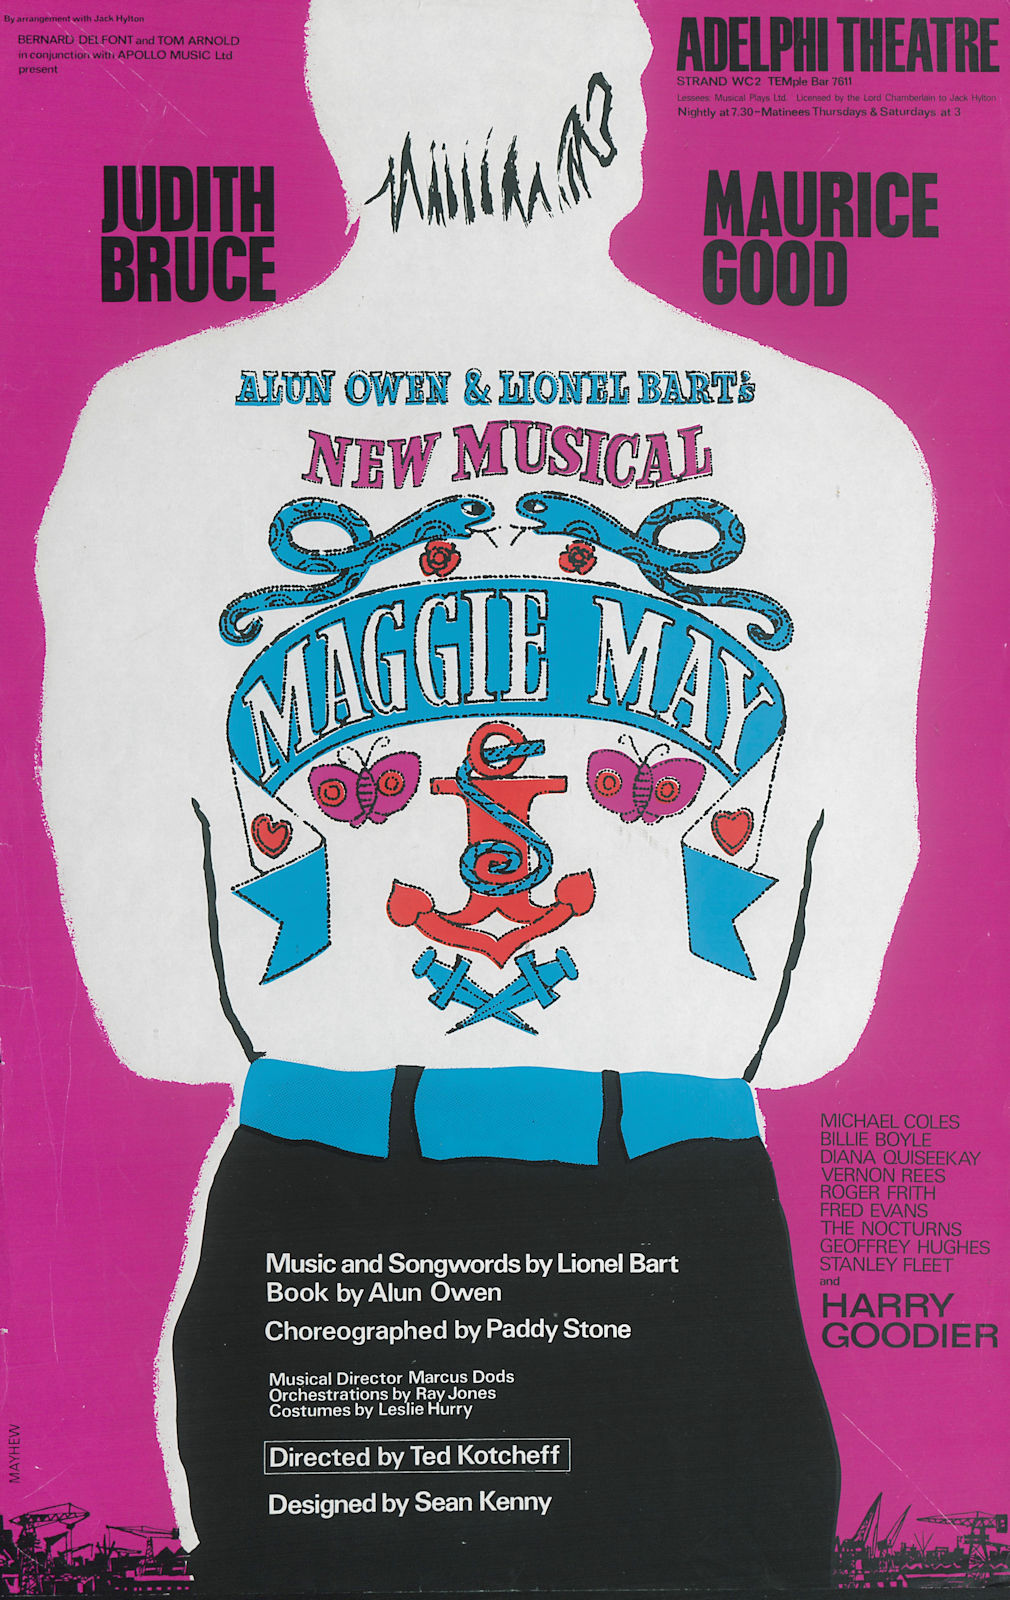 Adelphi Theatre. Maggie May musical. Lionel Bart. Judith Bruce Maurice Good 1964